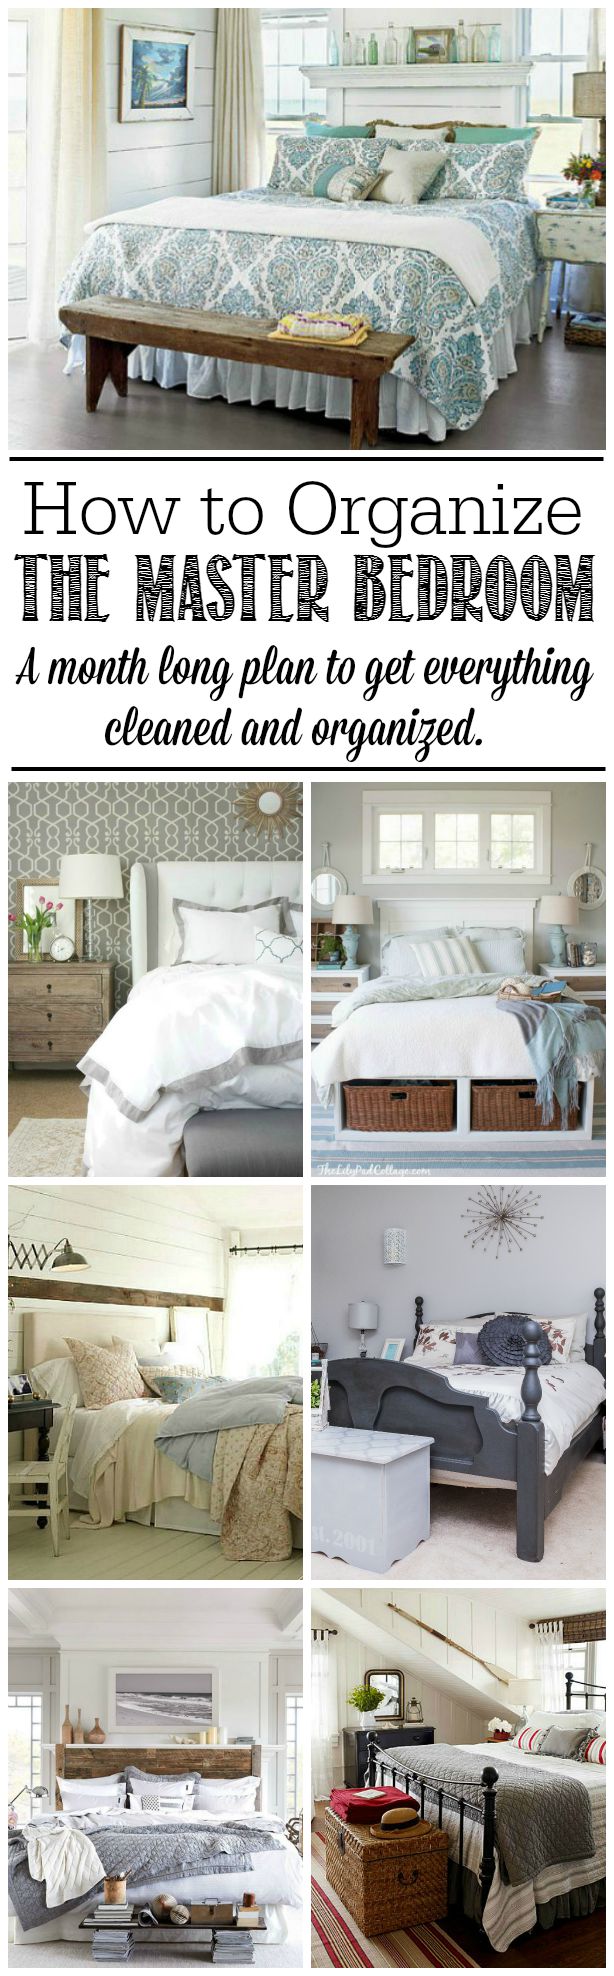 Everything you need to get your master bedroom cleaned and orgainized!  Perfect to do for fall with free printables included.